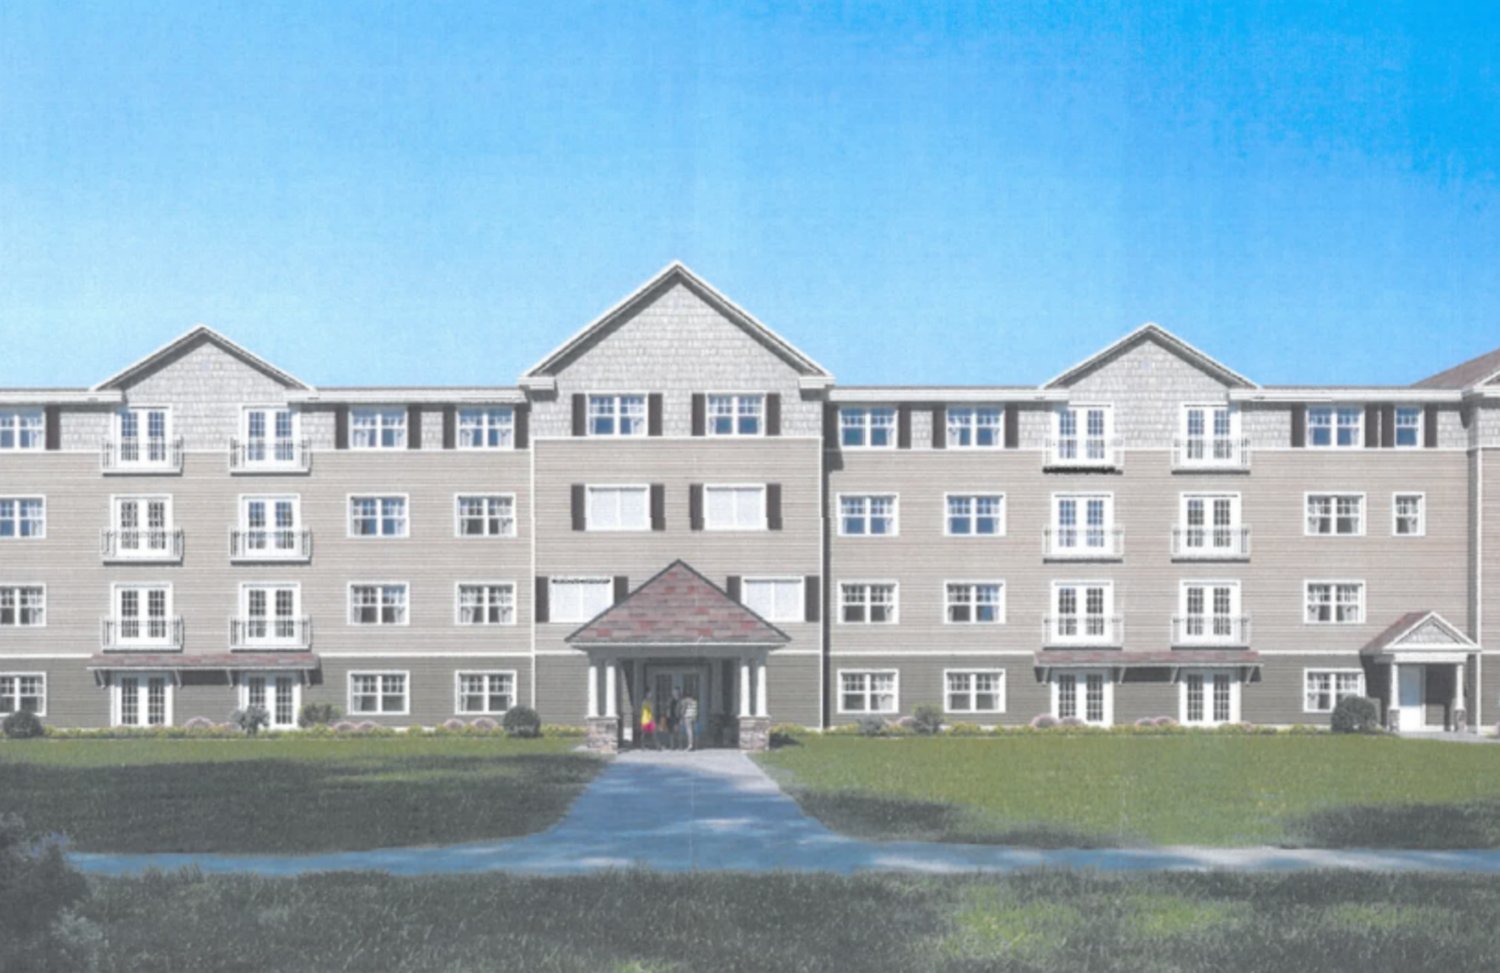 A rendering shows one of two 54-unit, four story apartment buildings that would be built east of the Kickemuit Reservoir, off Kinnicutt Avenue.